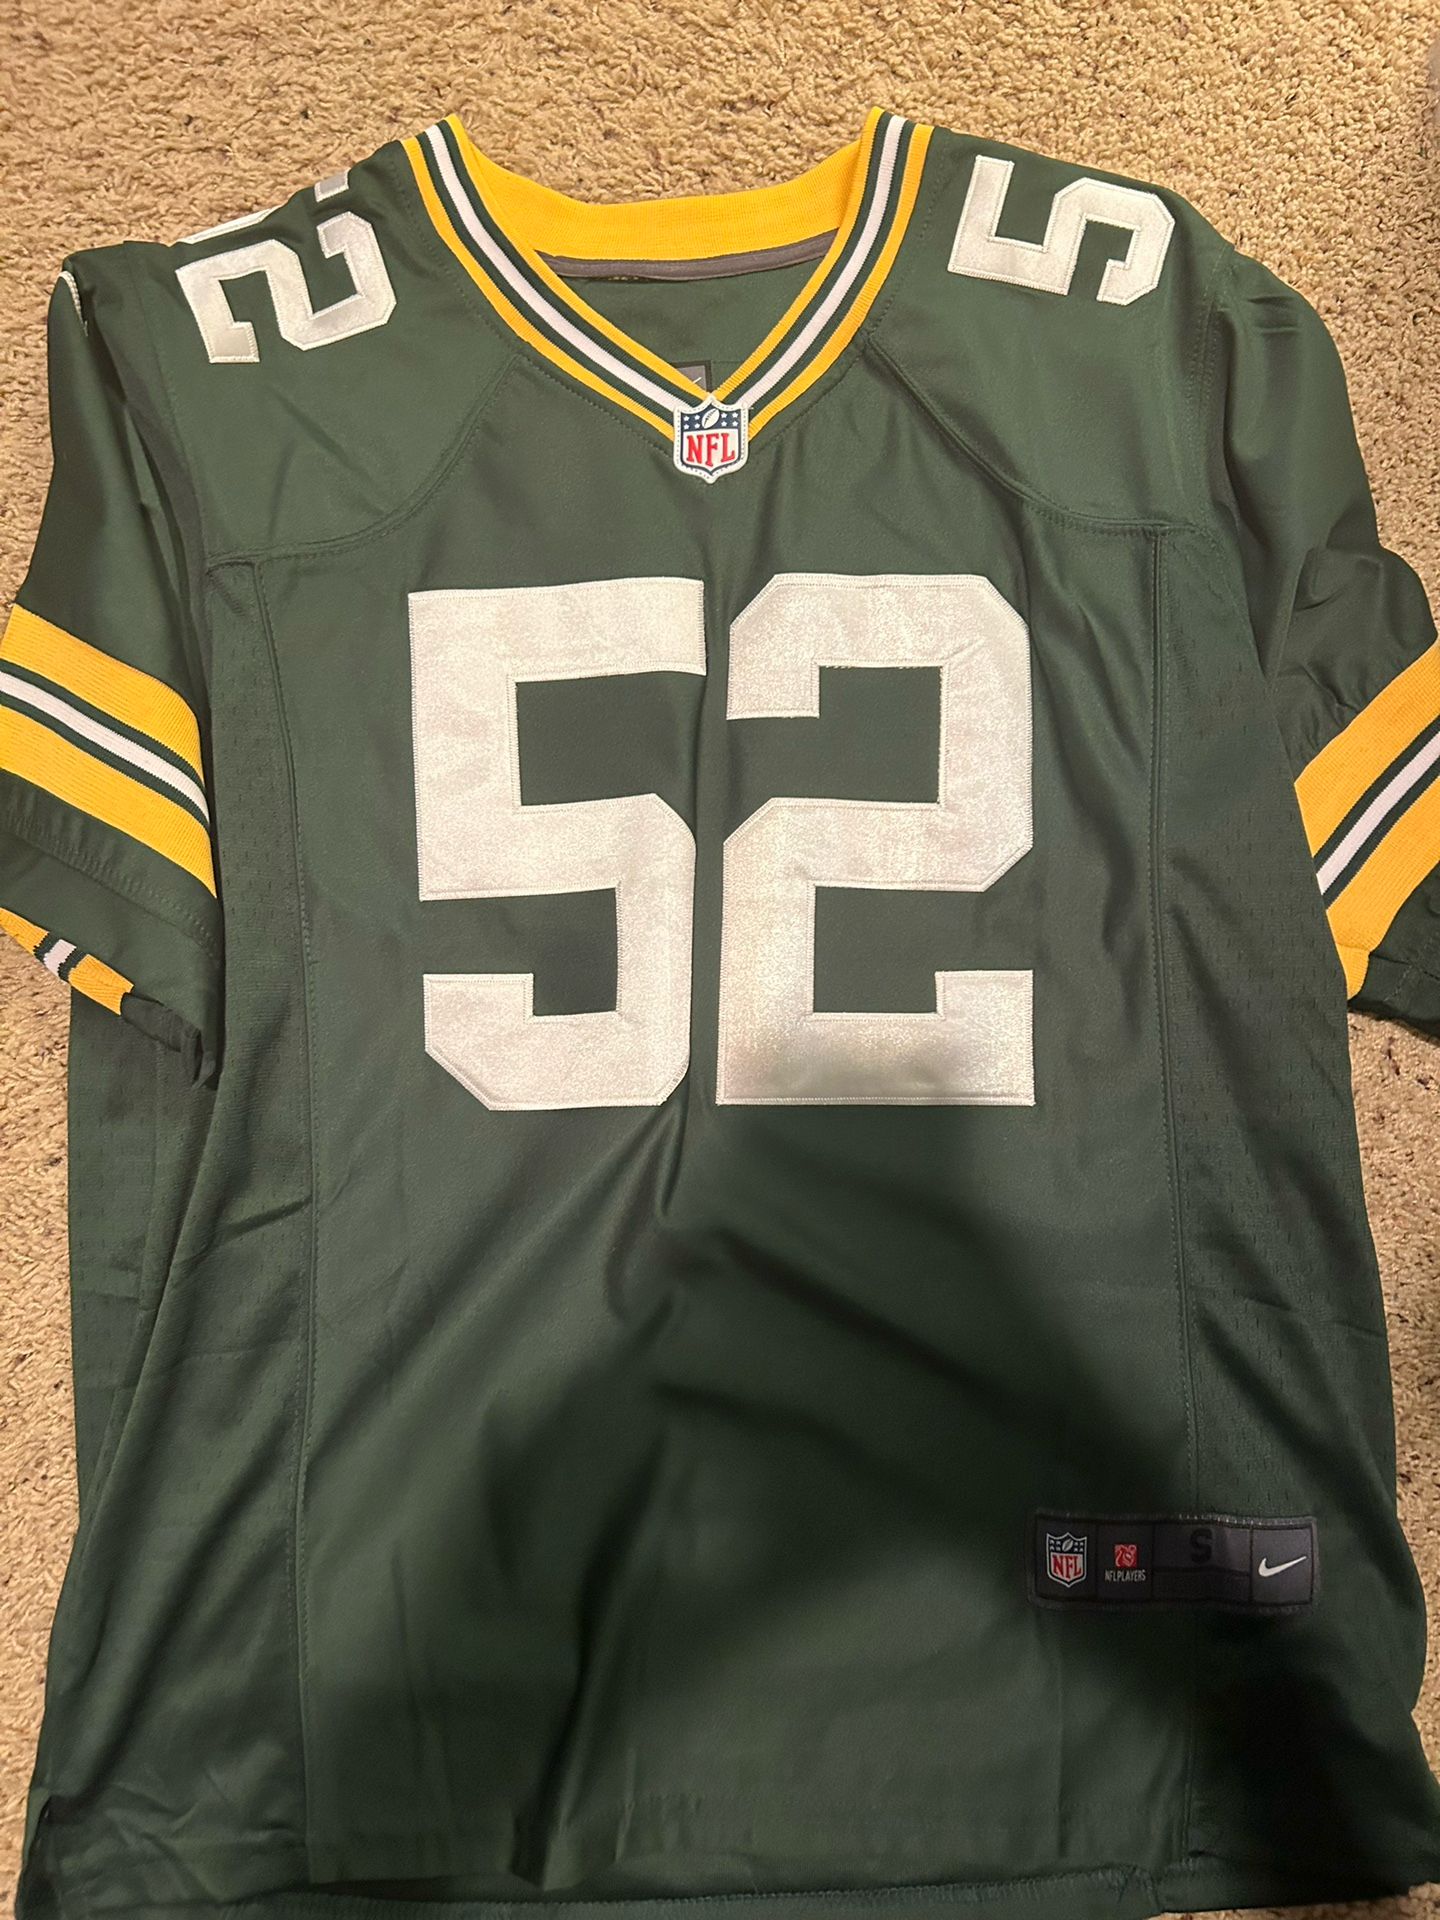 Packers Nike NFL jersey 